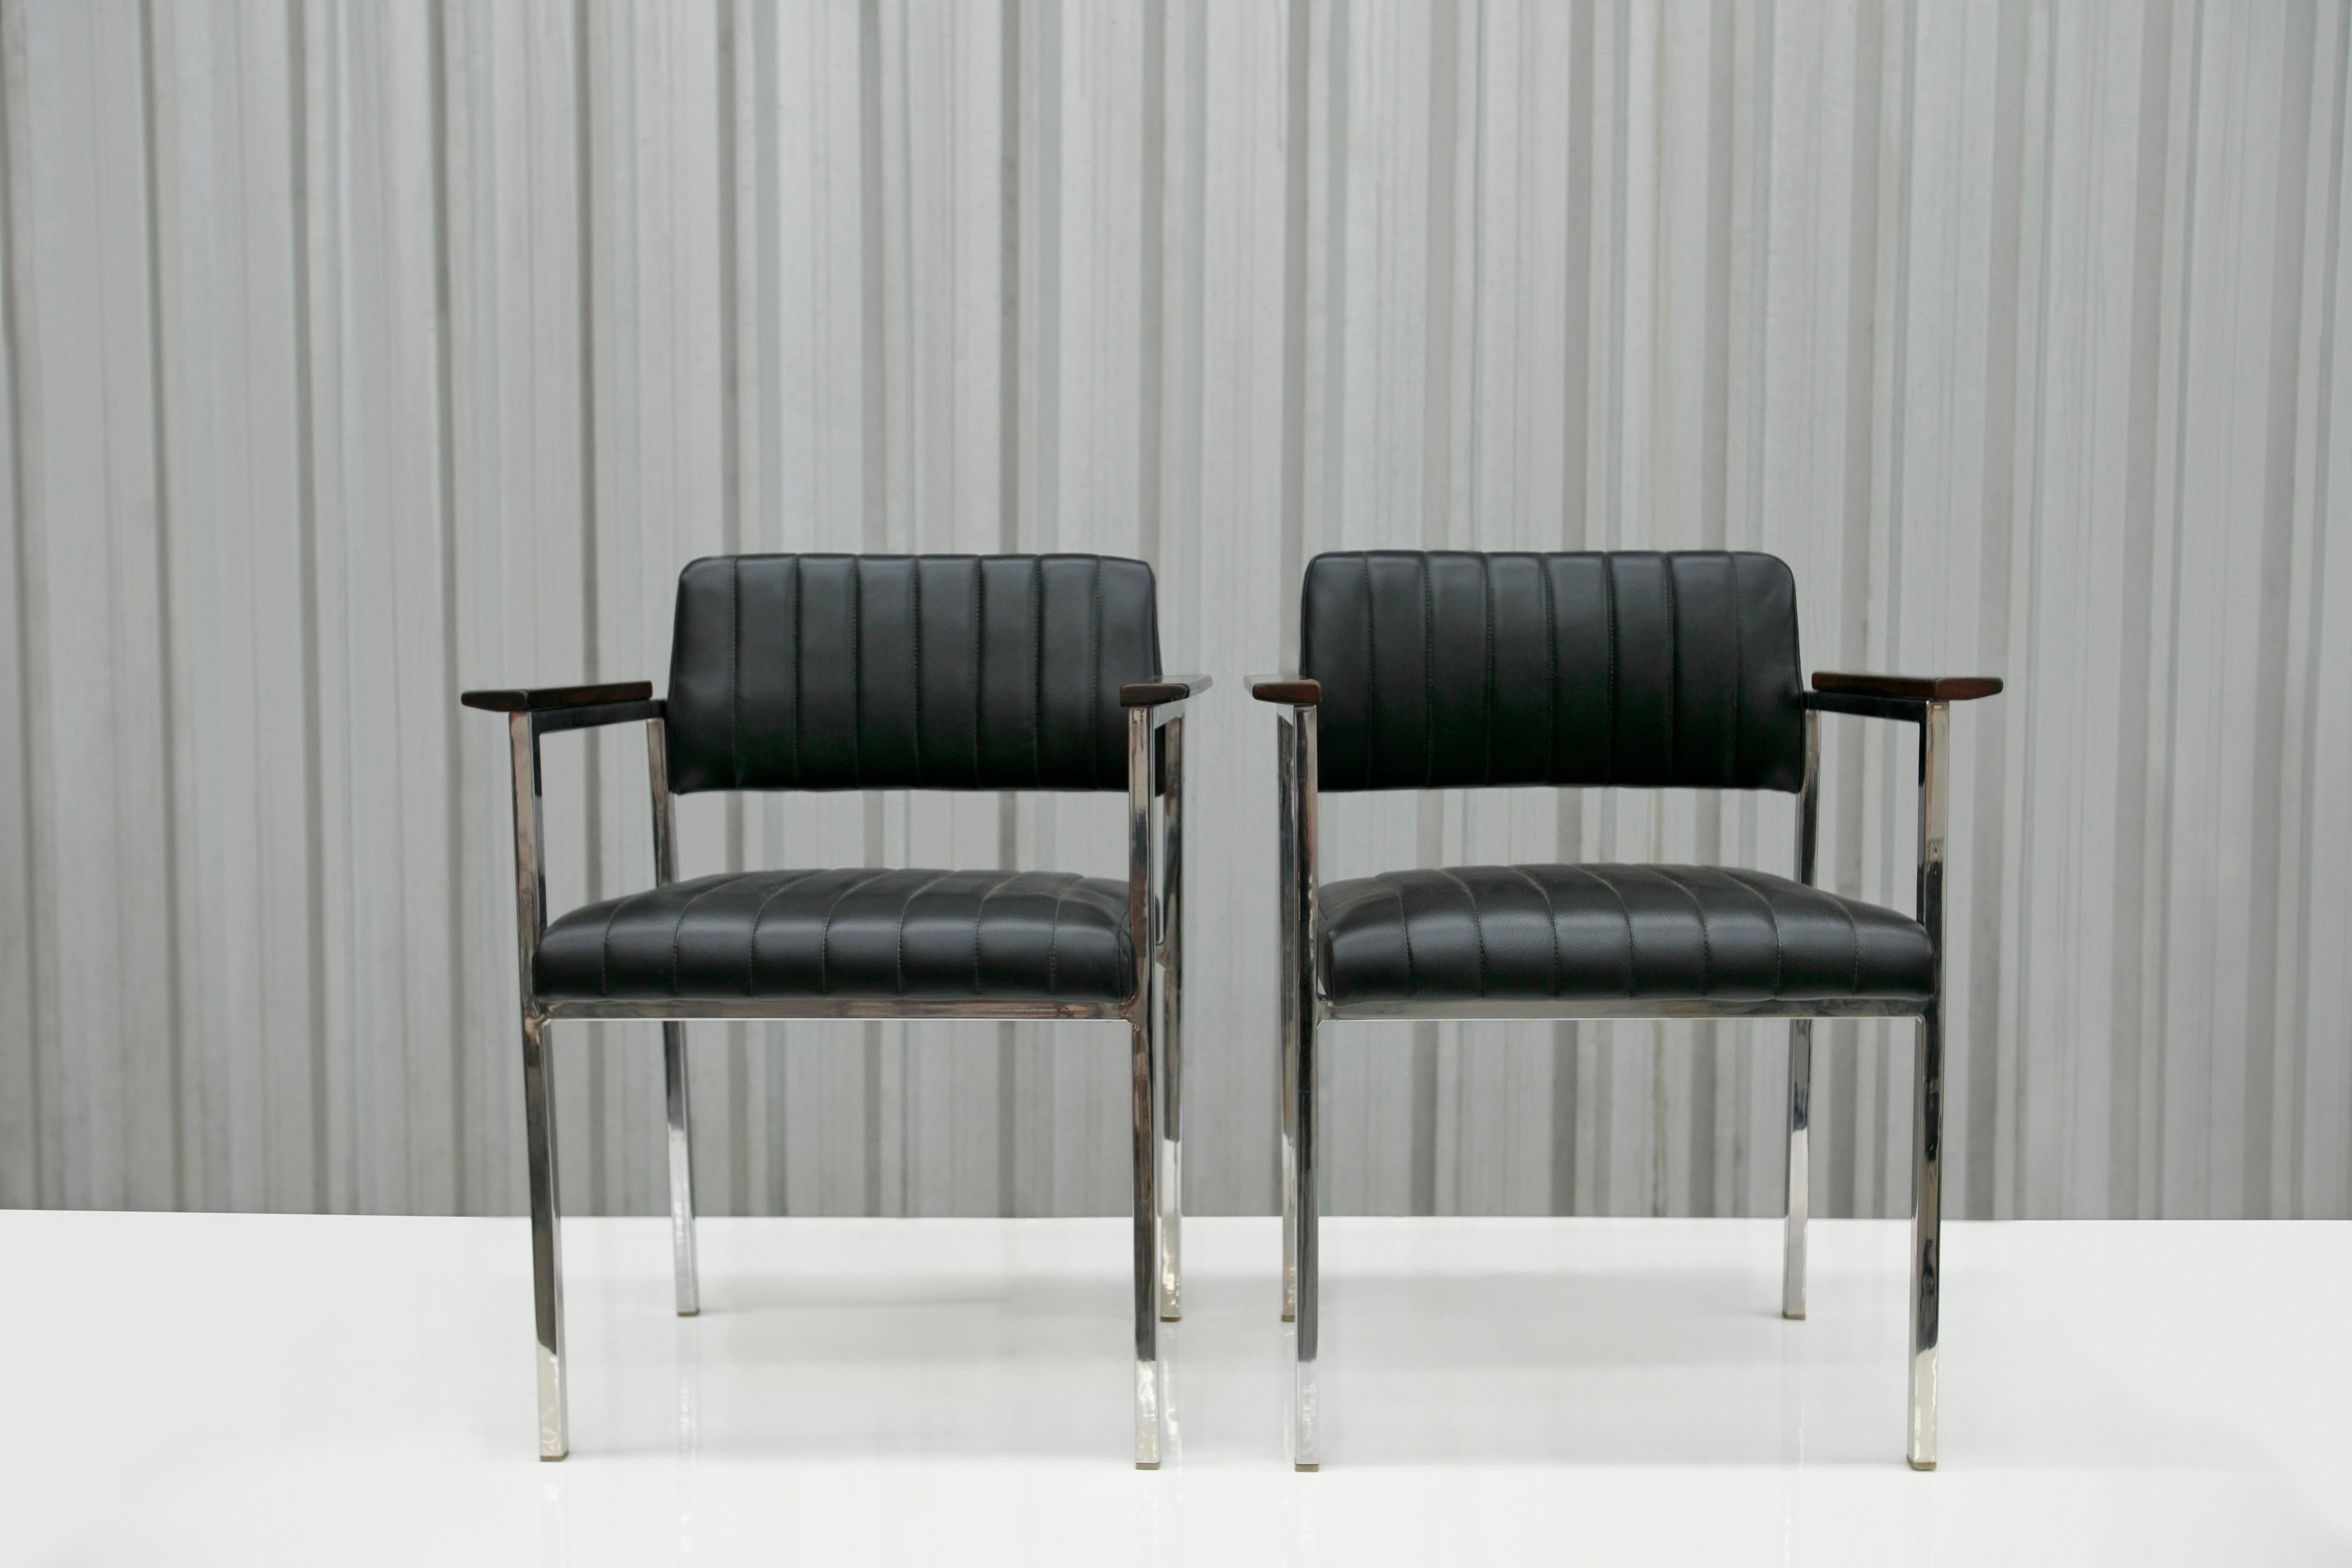 Available today, these Brazilian Modern Armchairs in Steel, Leather & Wood Unknown, 1960s, Brazil are gorgeous. 

The frame of these chairs is made with steel and the seat and backrest is made with black leather. In addition, the armrests are made